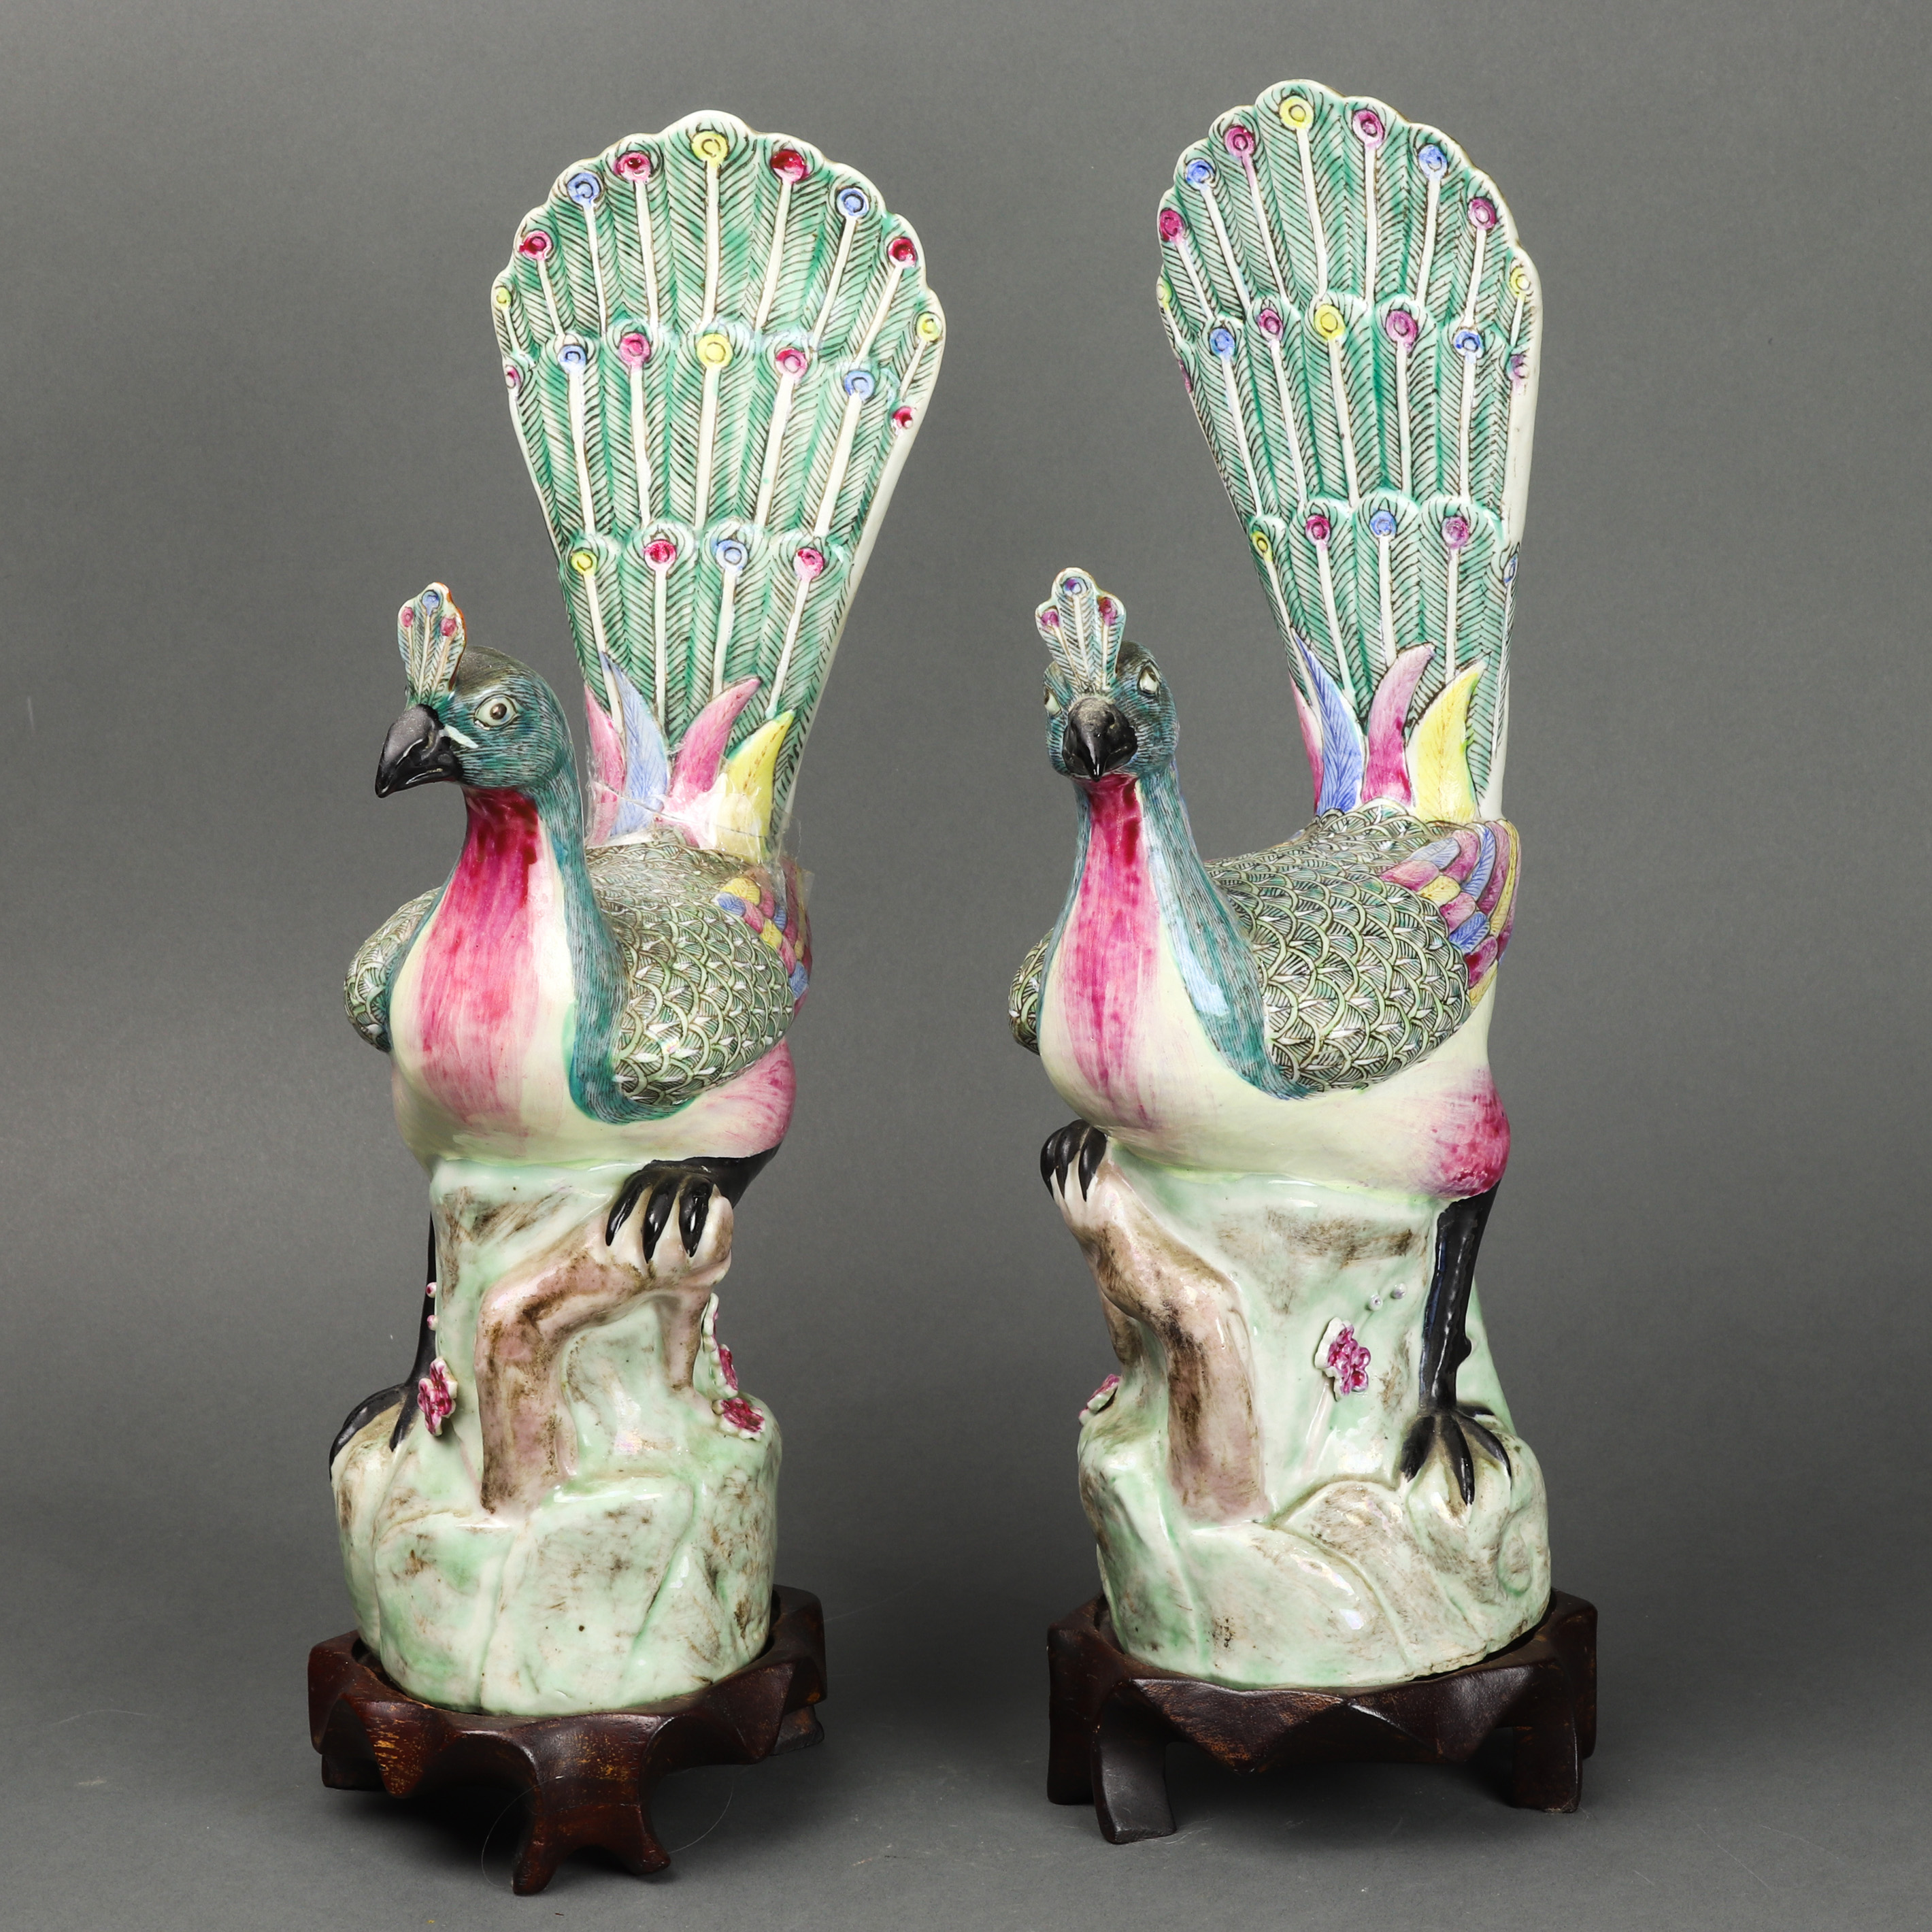 PAIR OF CHINESE FAMILLE ROSE FIGURES 3a376f